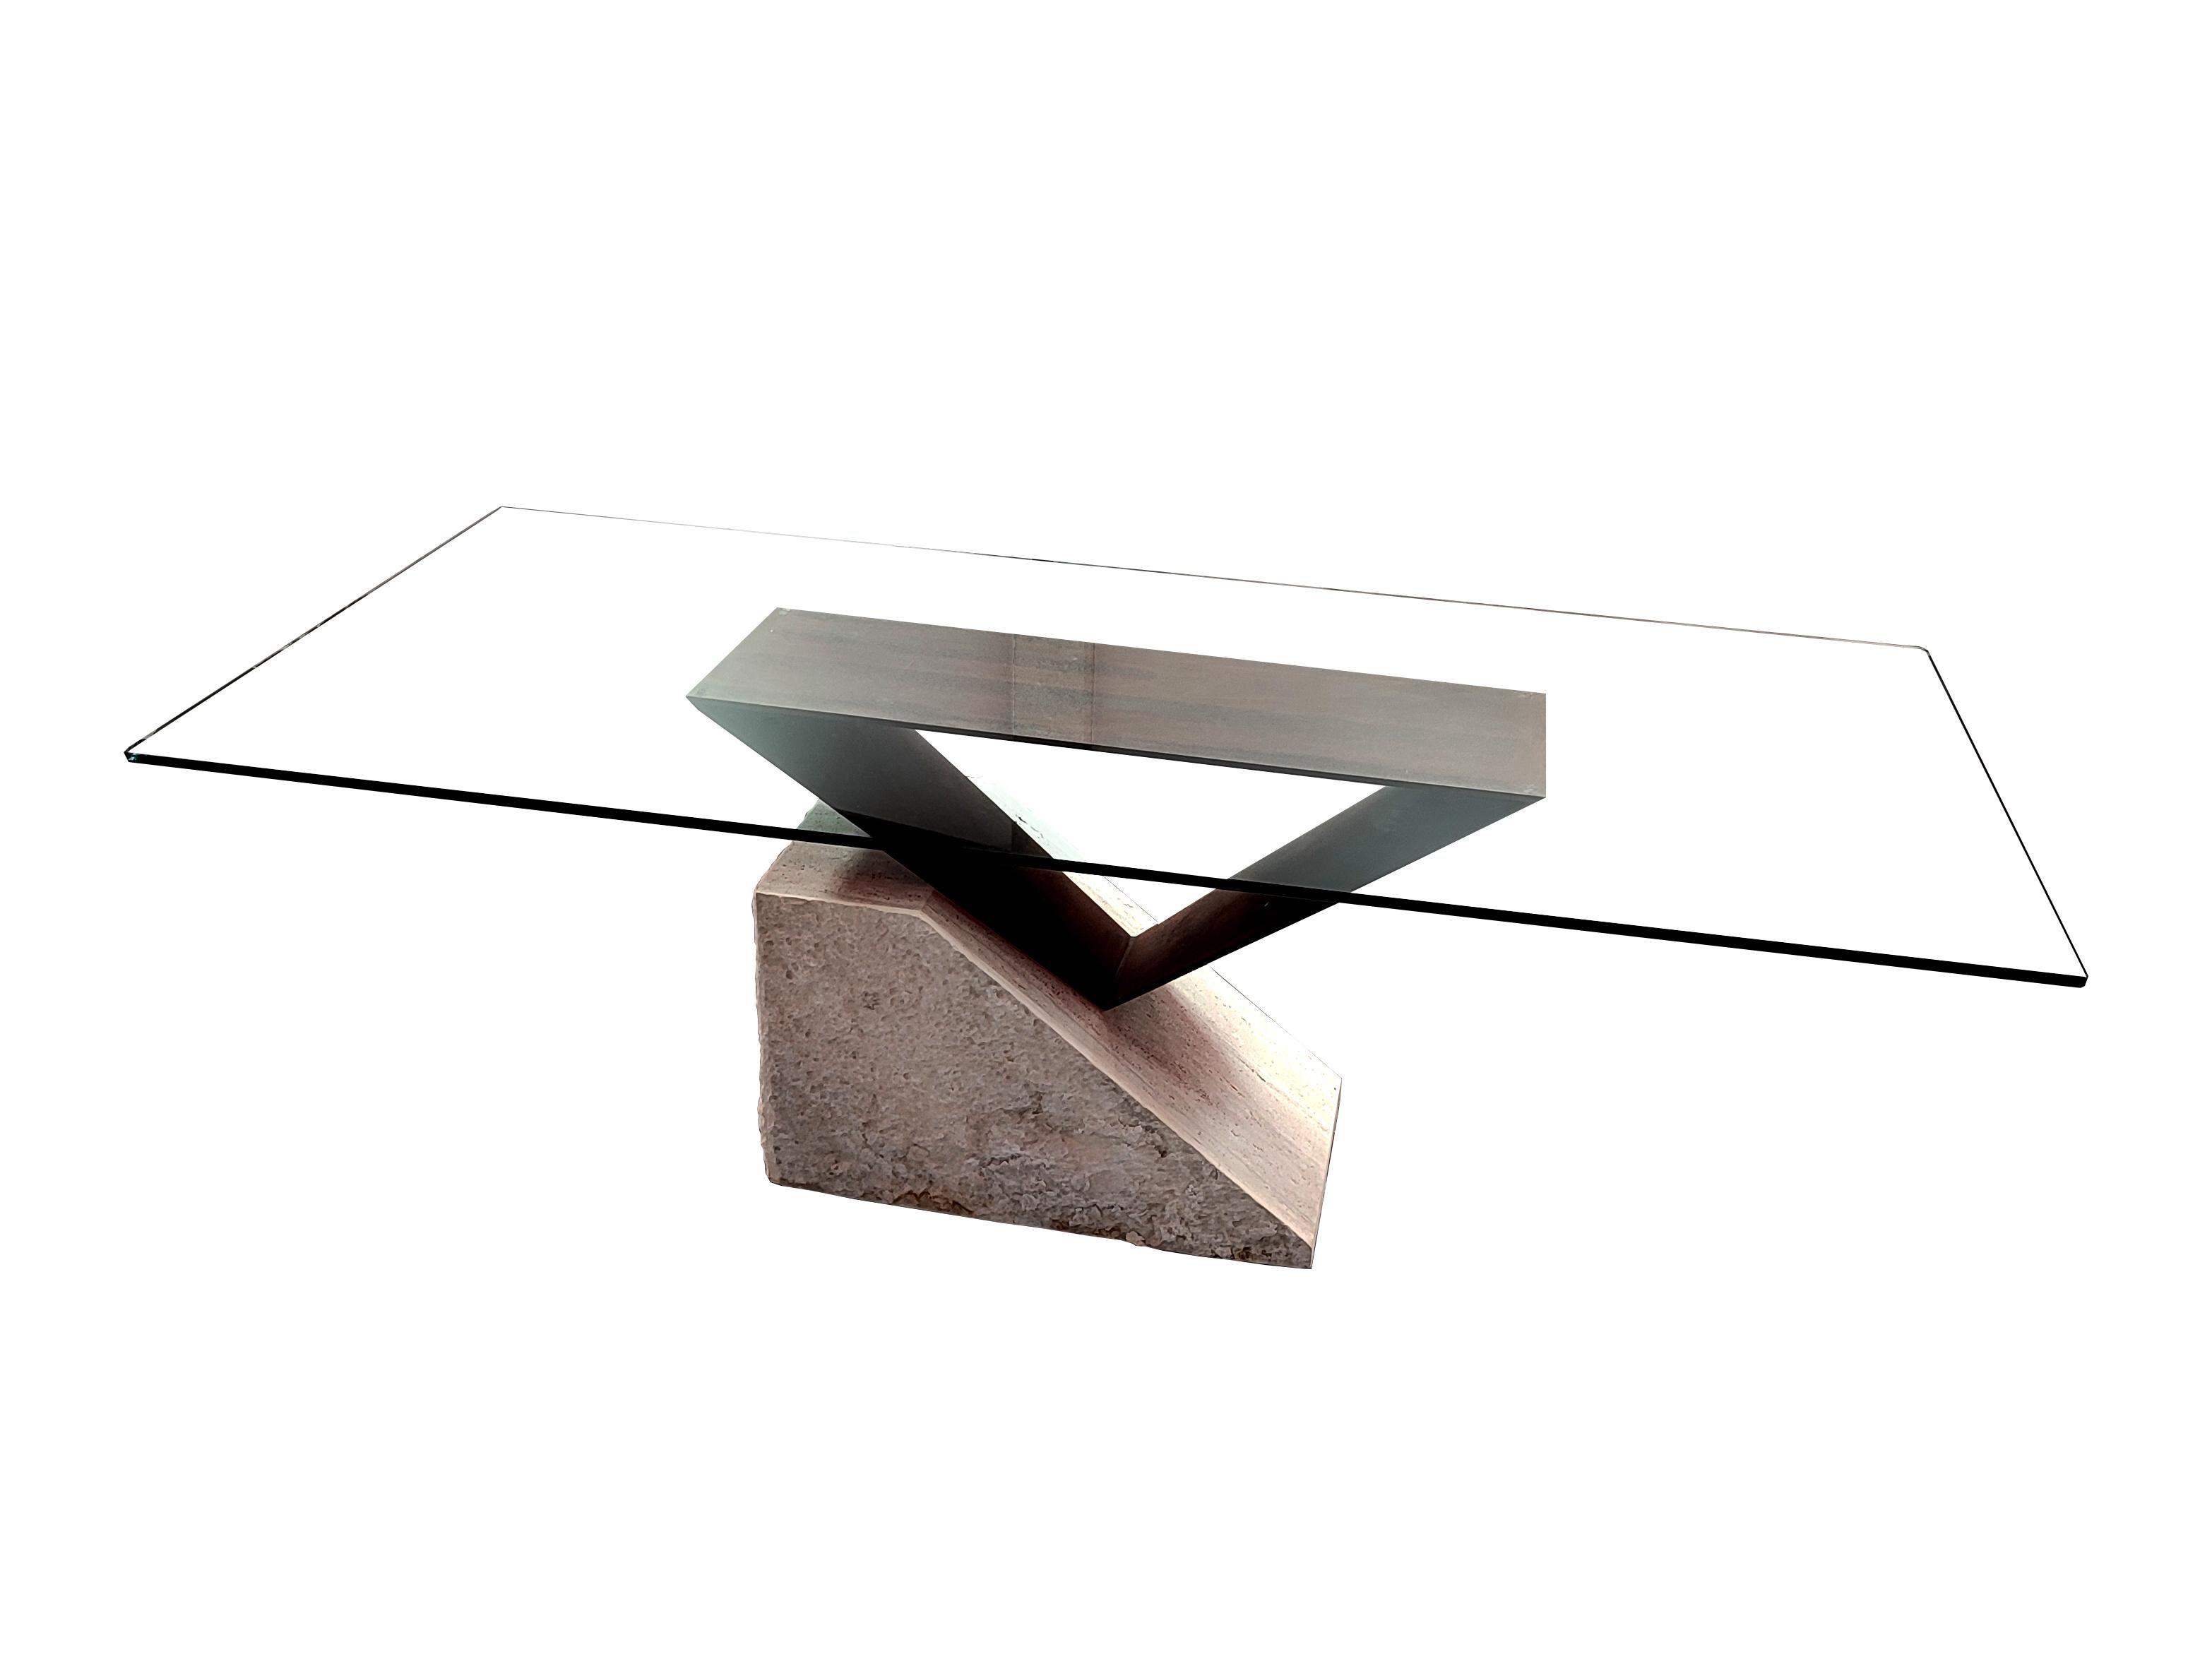 Dining Table Rough Travertine Marble & Rust Iron Unique Edition Italian Marble
Dining table in marble combined with metal and glass top. This is a one-piece limited edition by Spanish artist and designer Joaquín Moll. The travertine marble in this